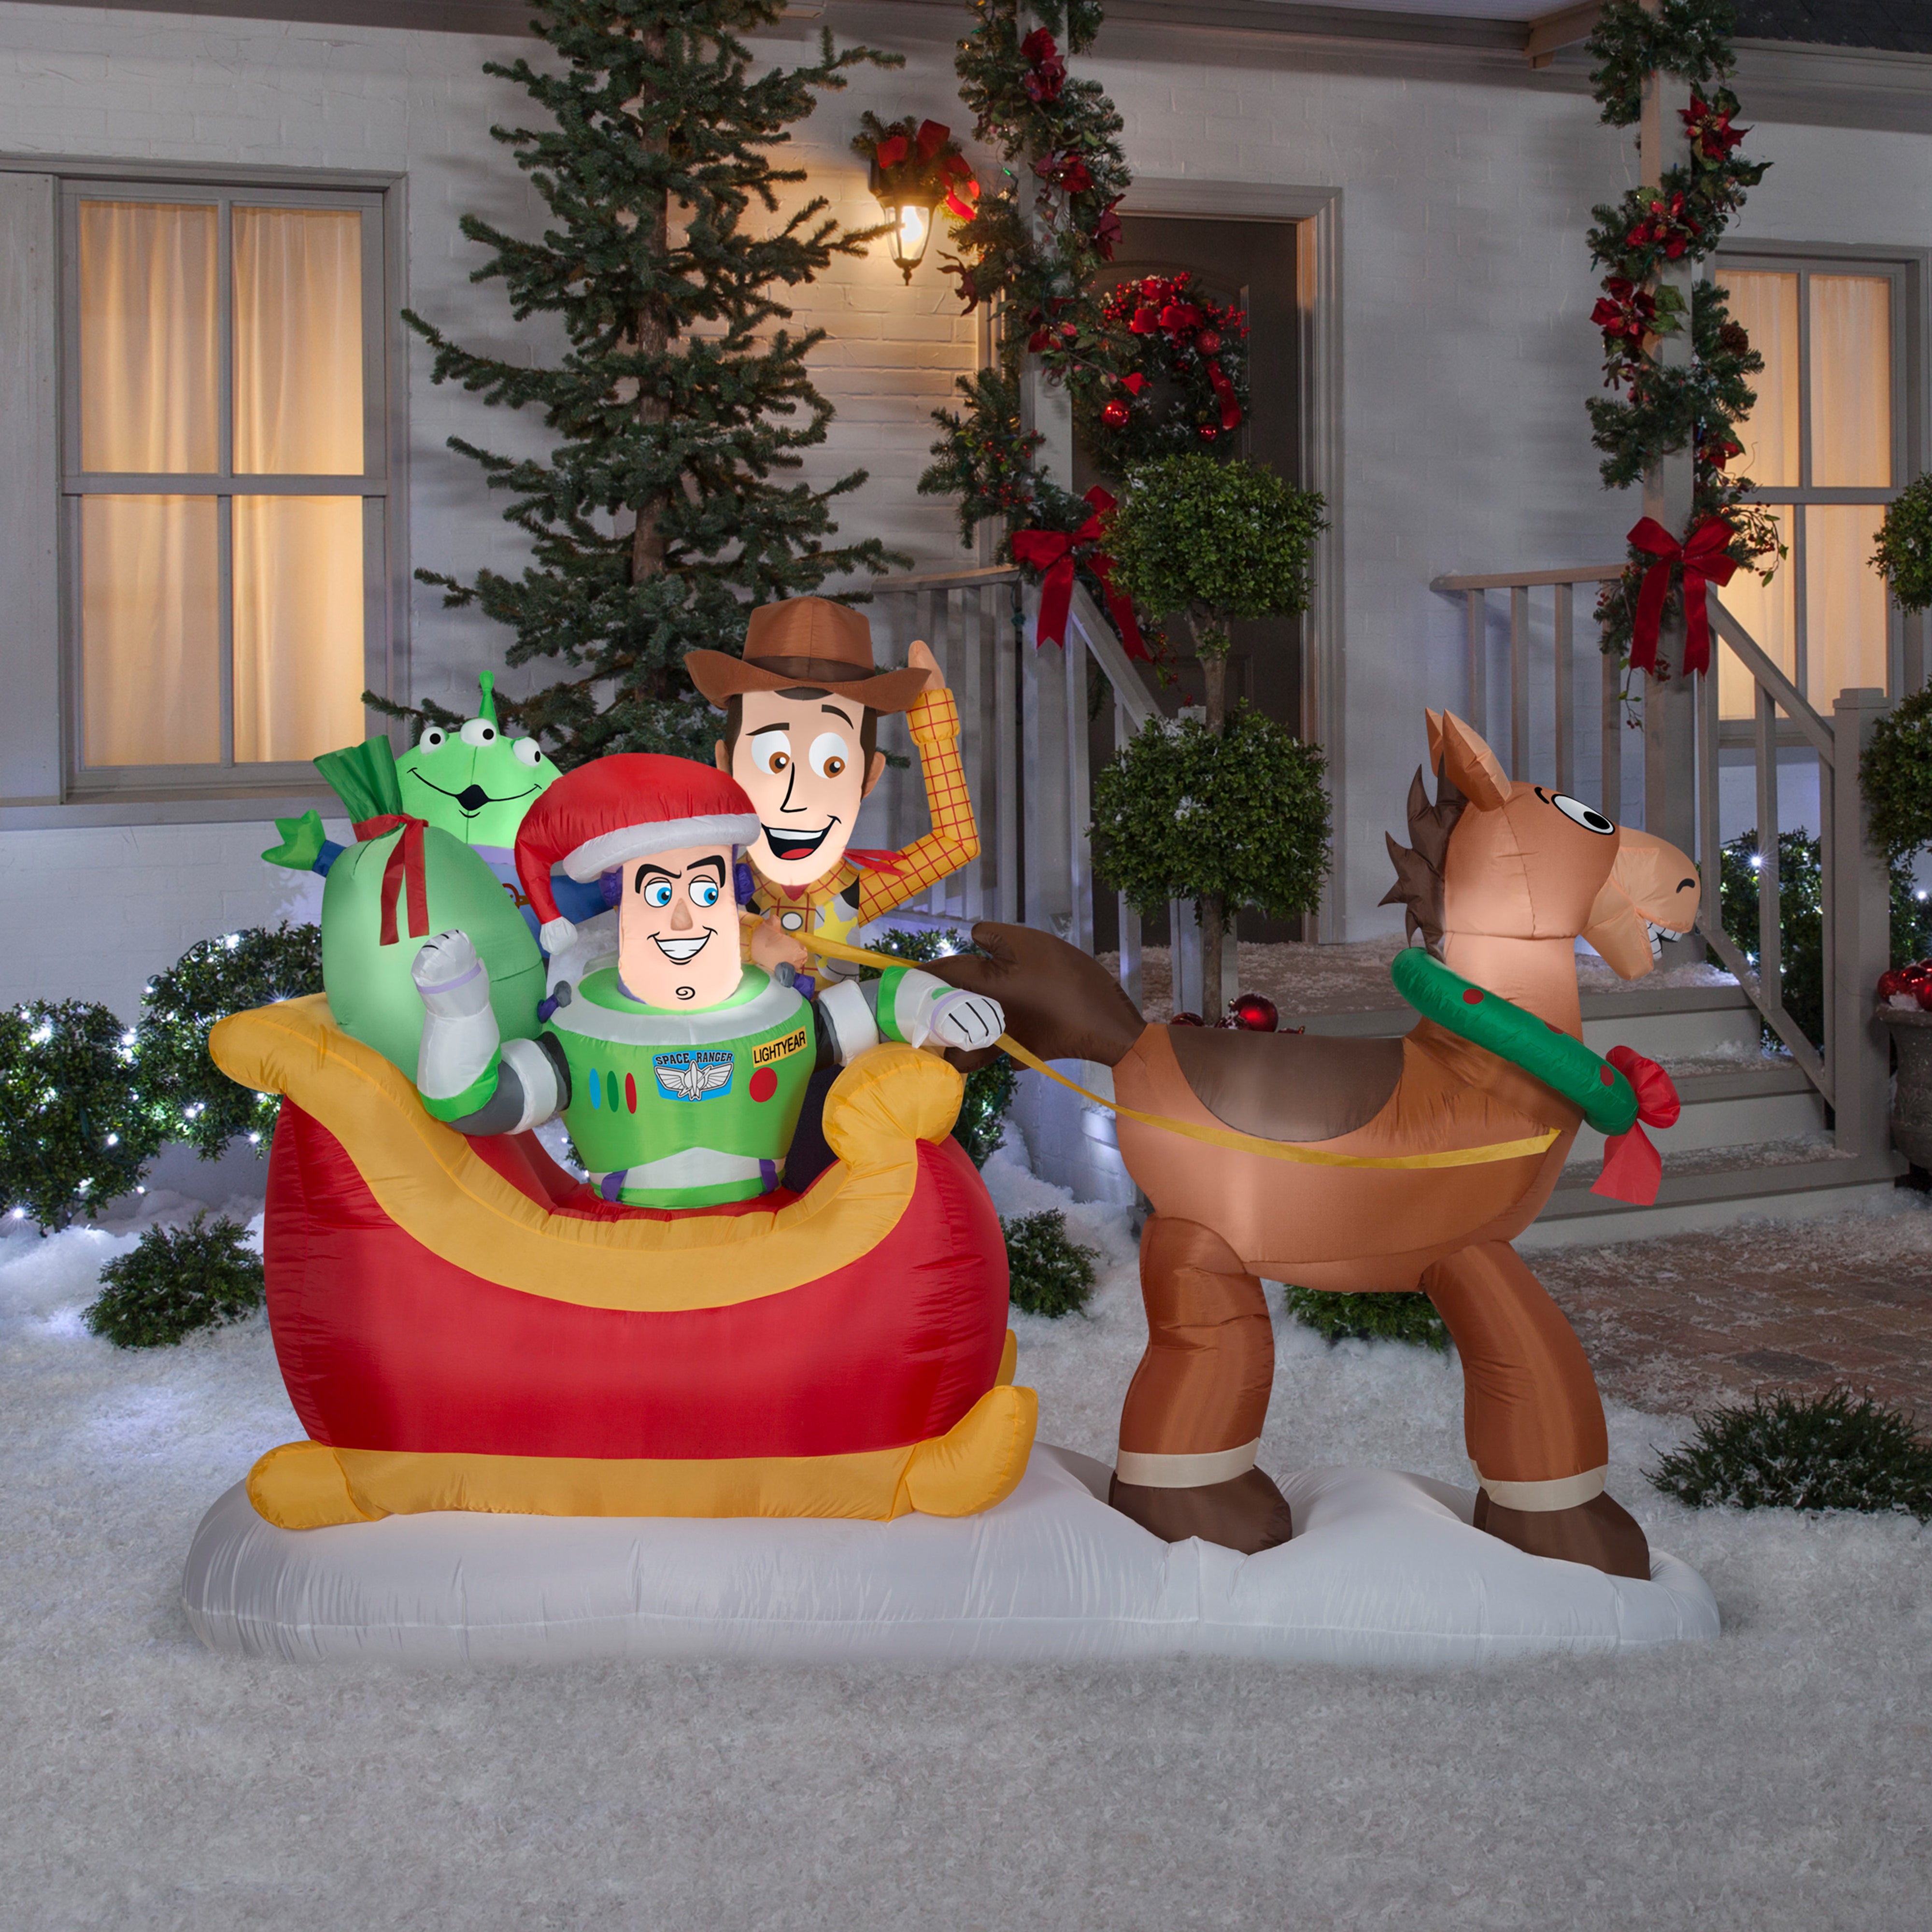 Gemmy Christmas Airblown Inflatable Toy Story w/Sleigh Scene Disney , 5 ft Tall, Multi